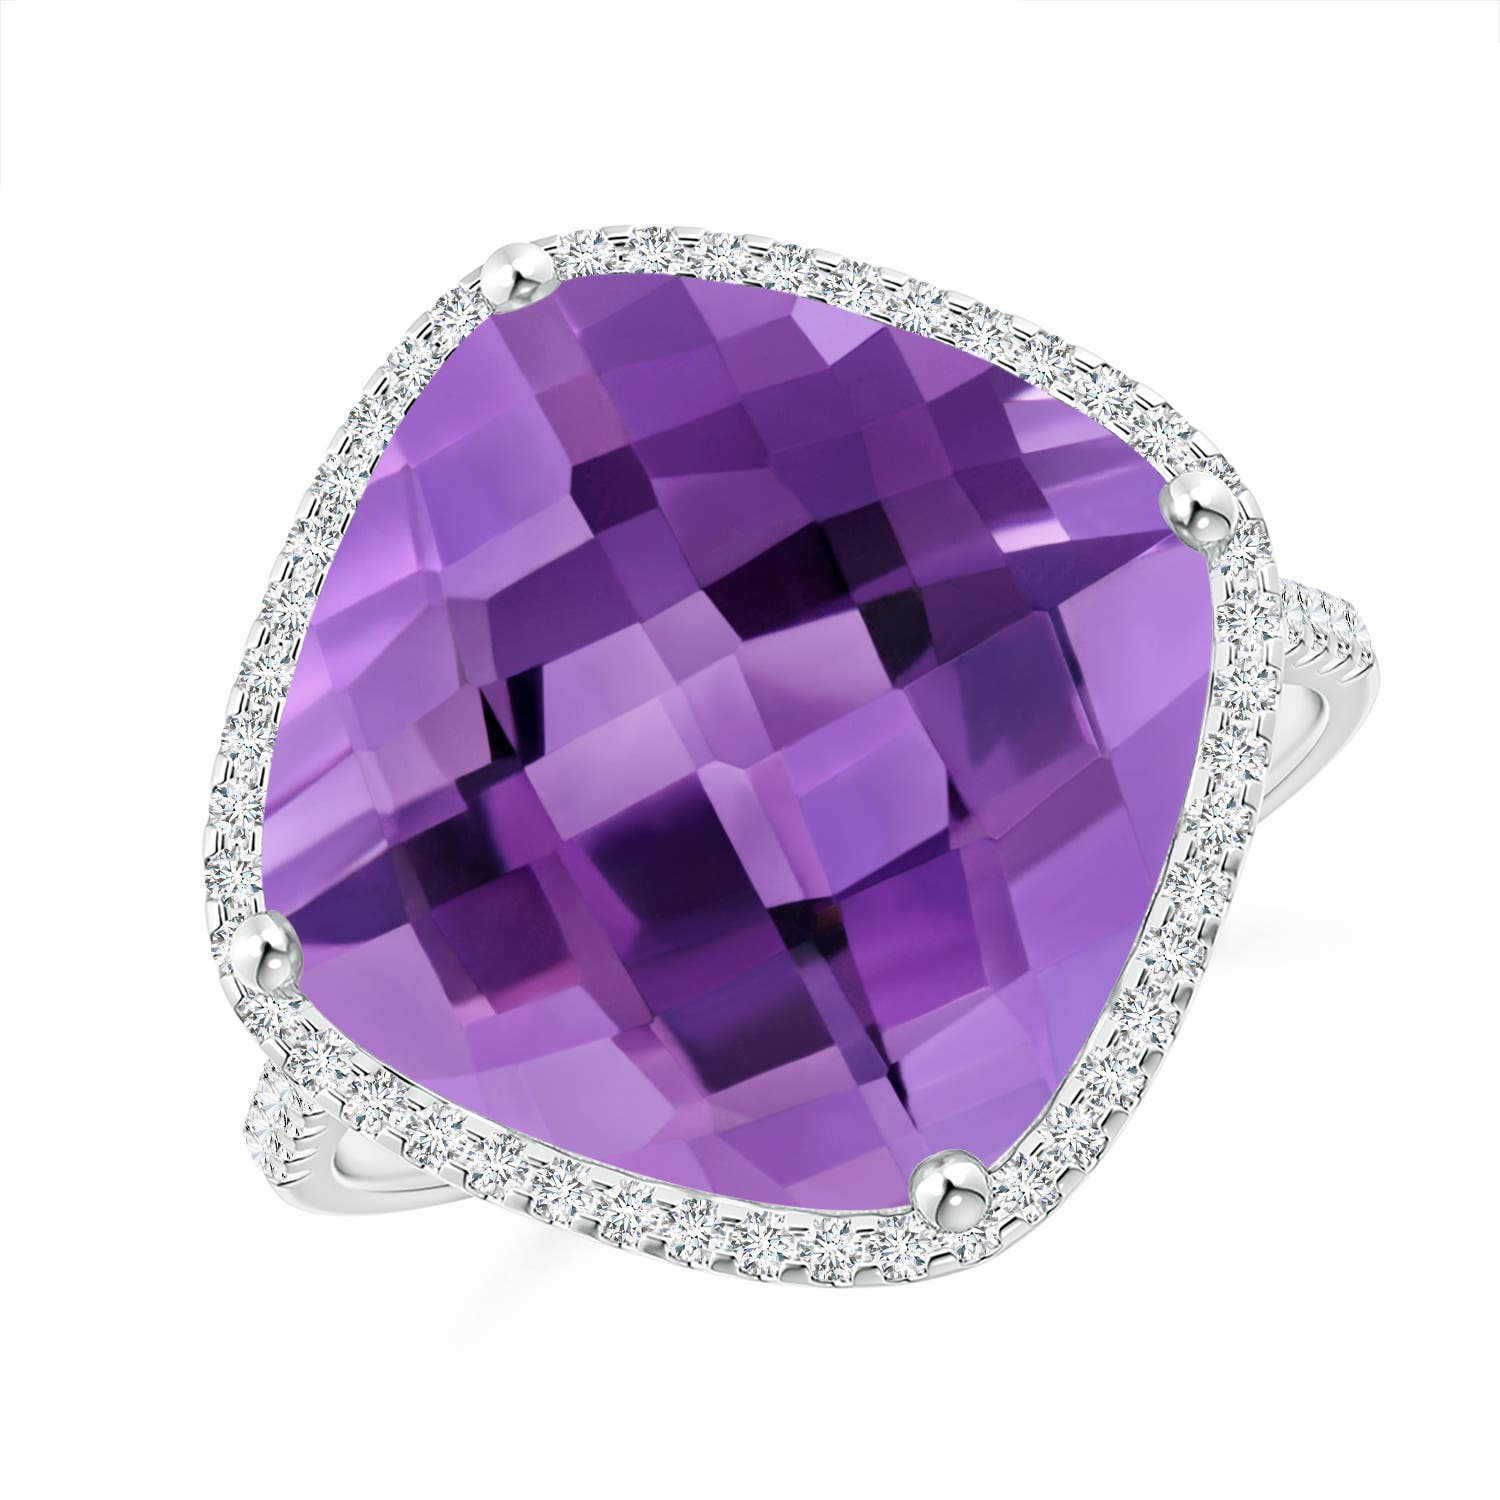 AA - Amethyst / 8.32 CT / 14 KT White Gold